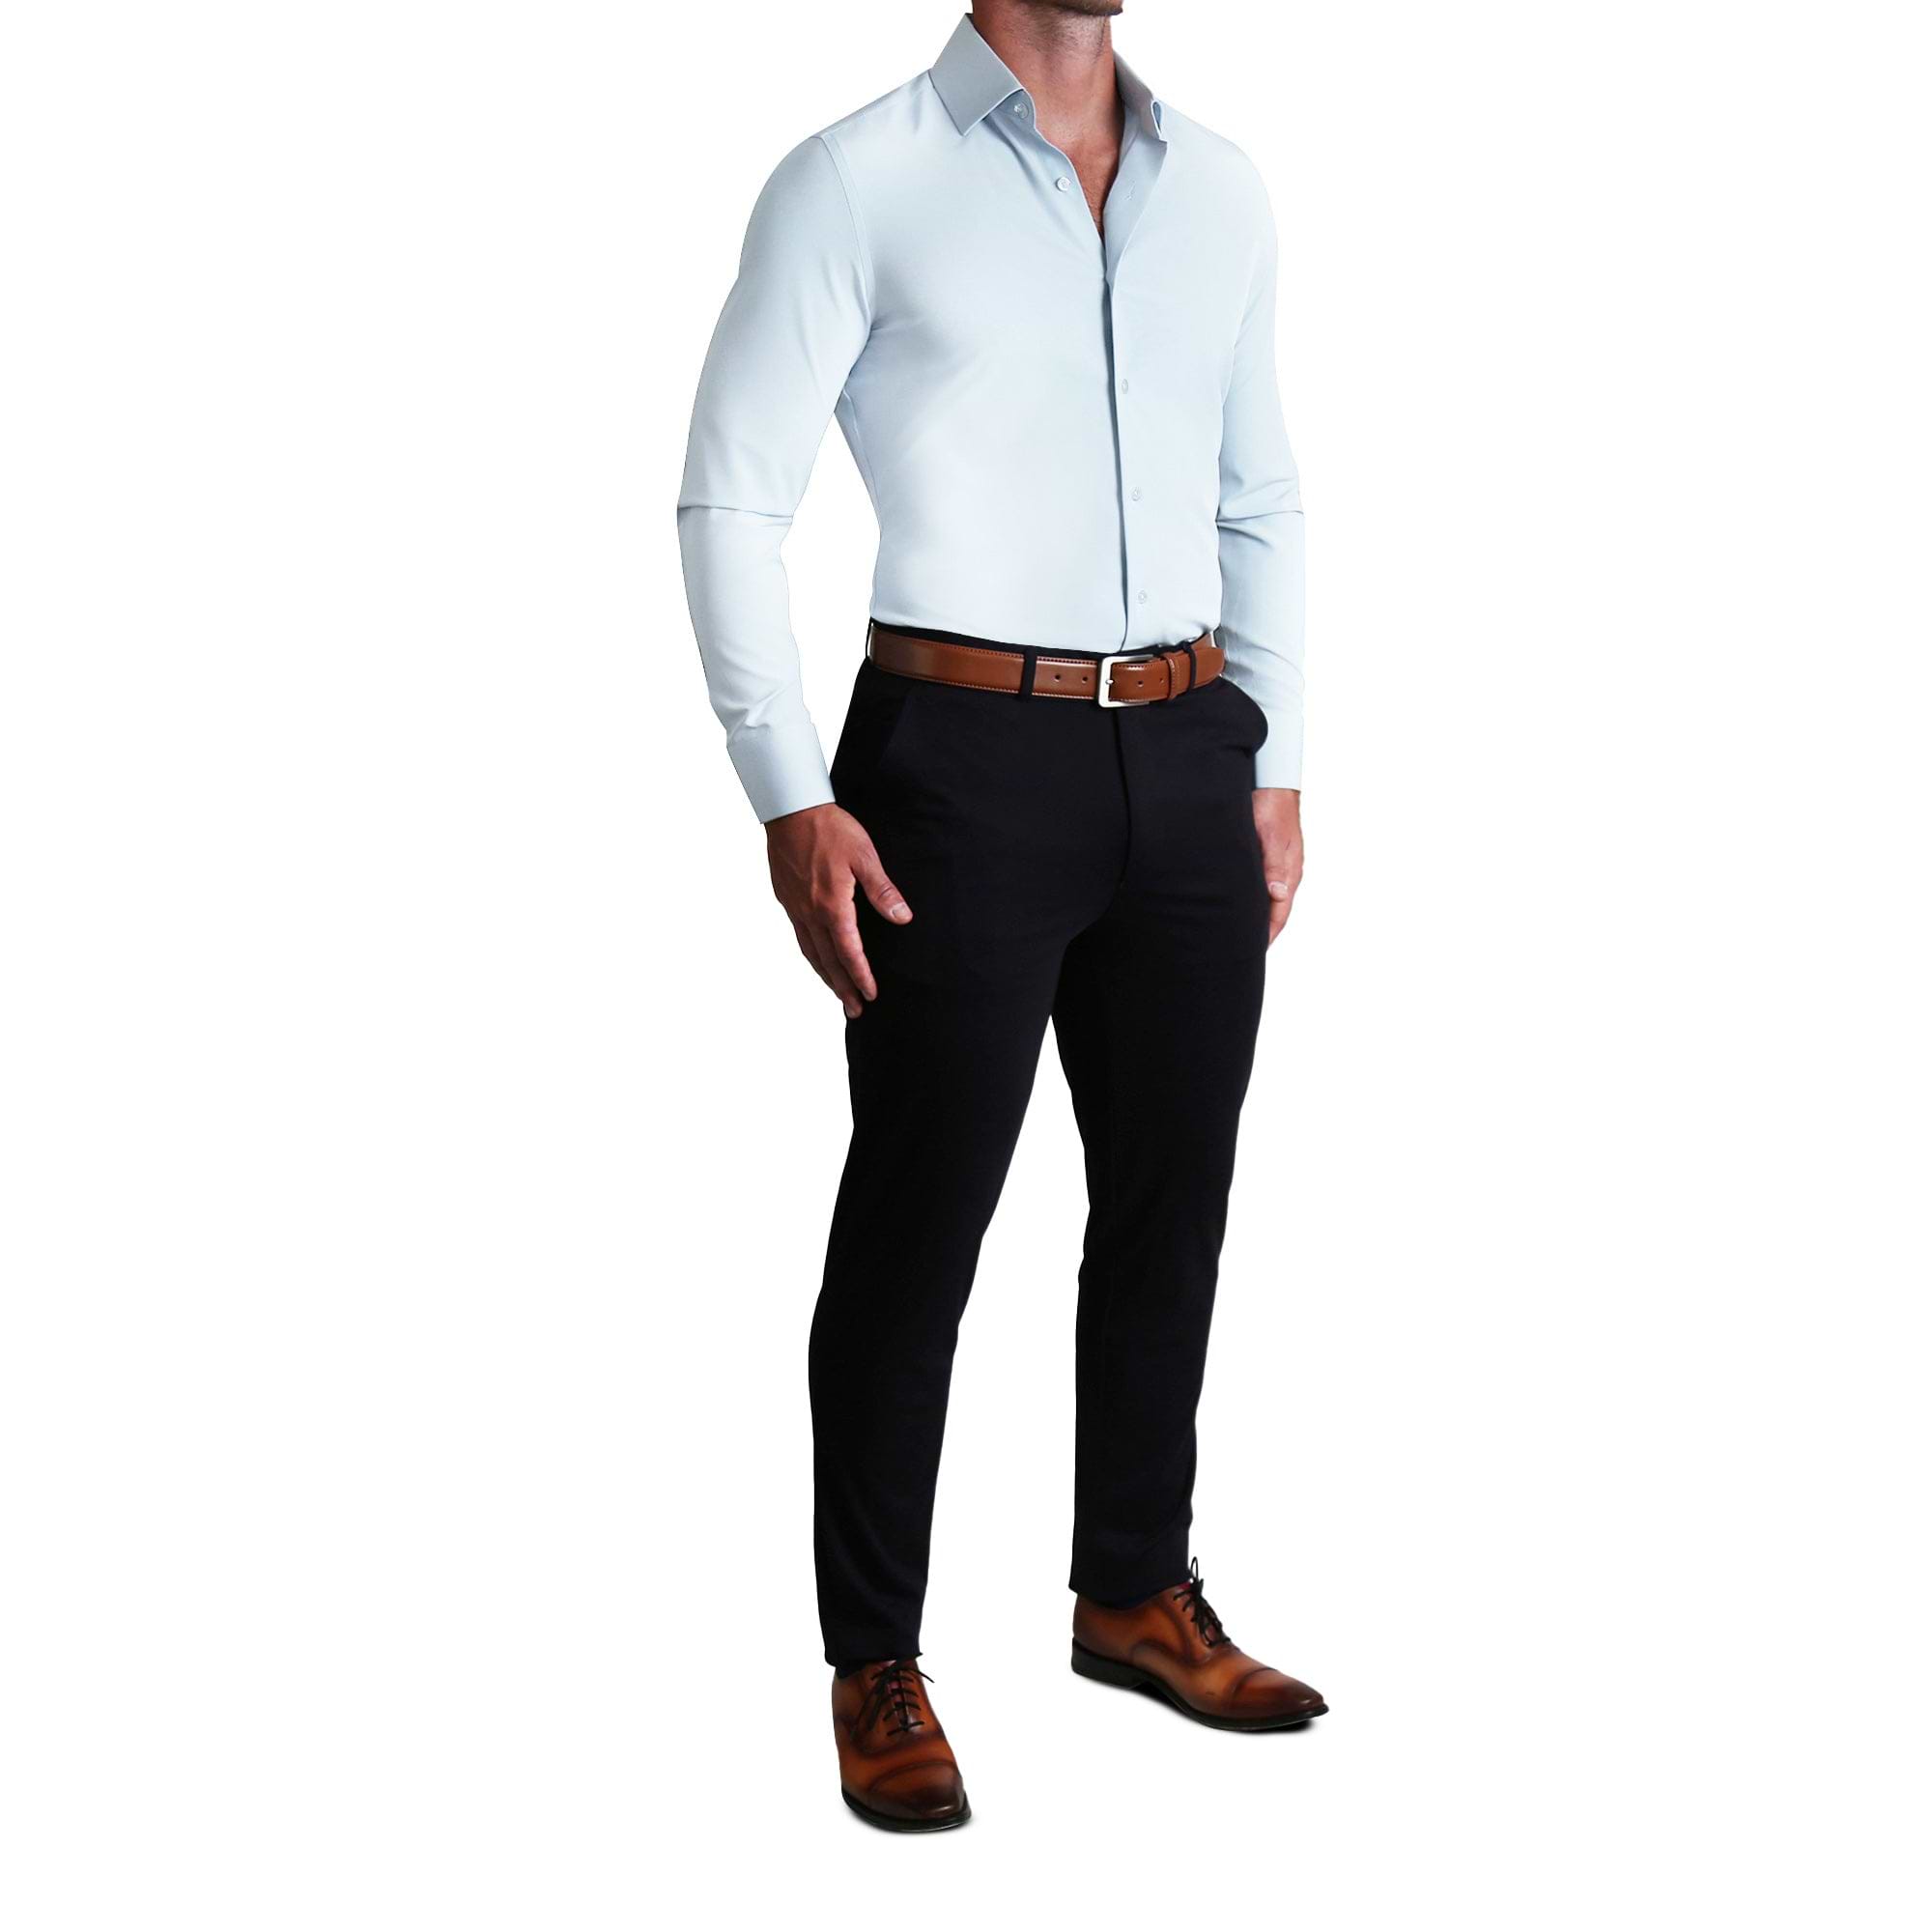 "The Javier" Pale Blue - Classic Fit